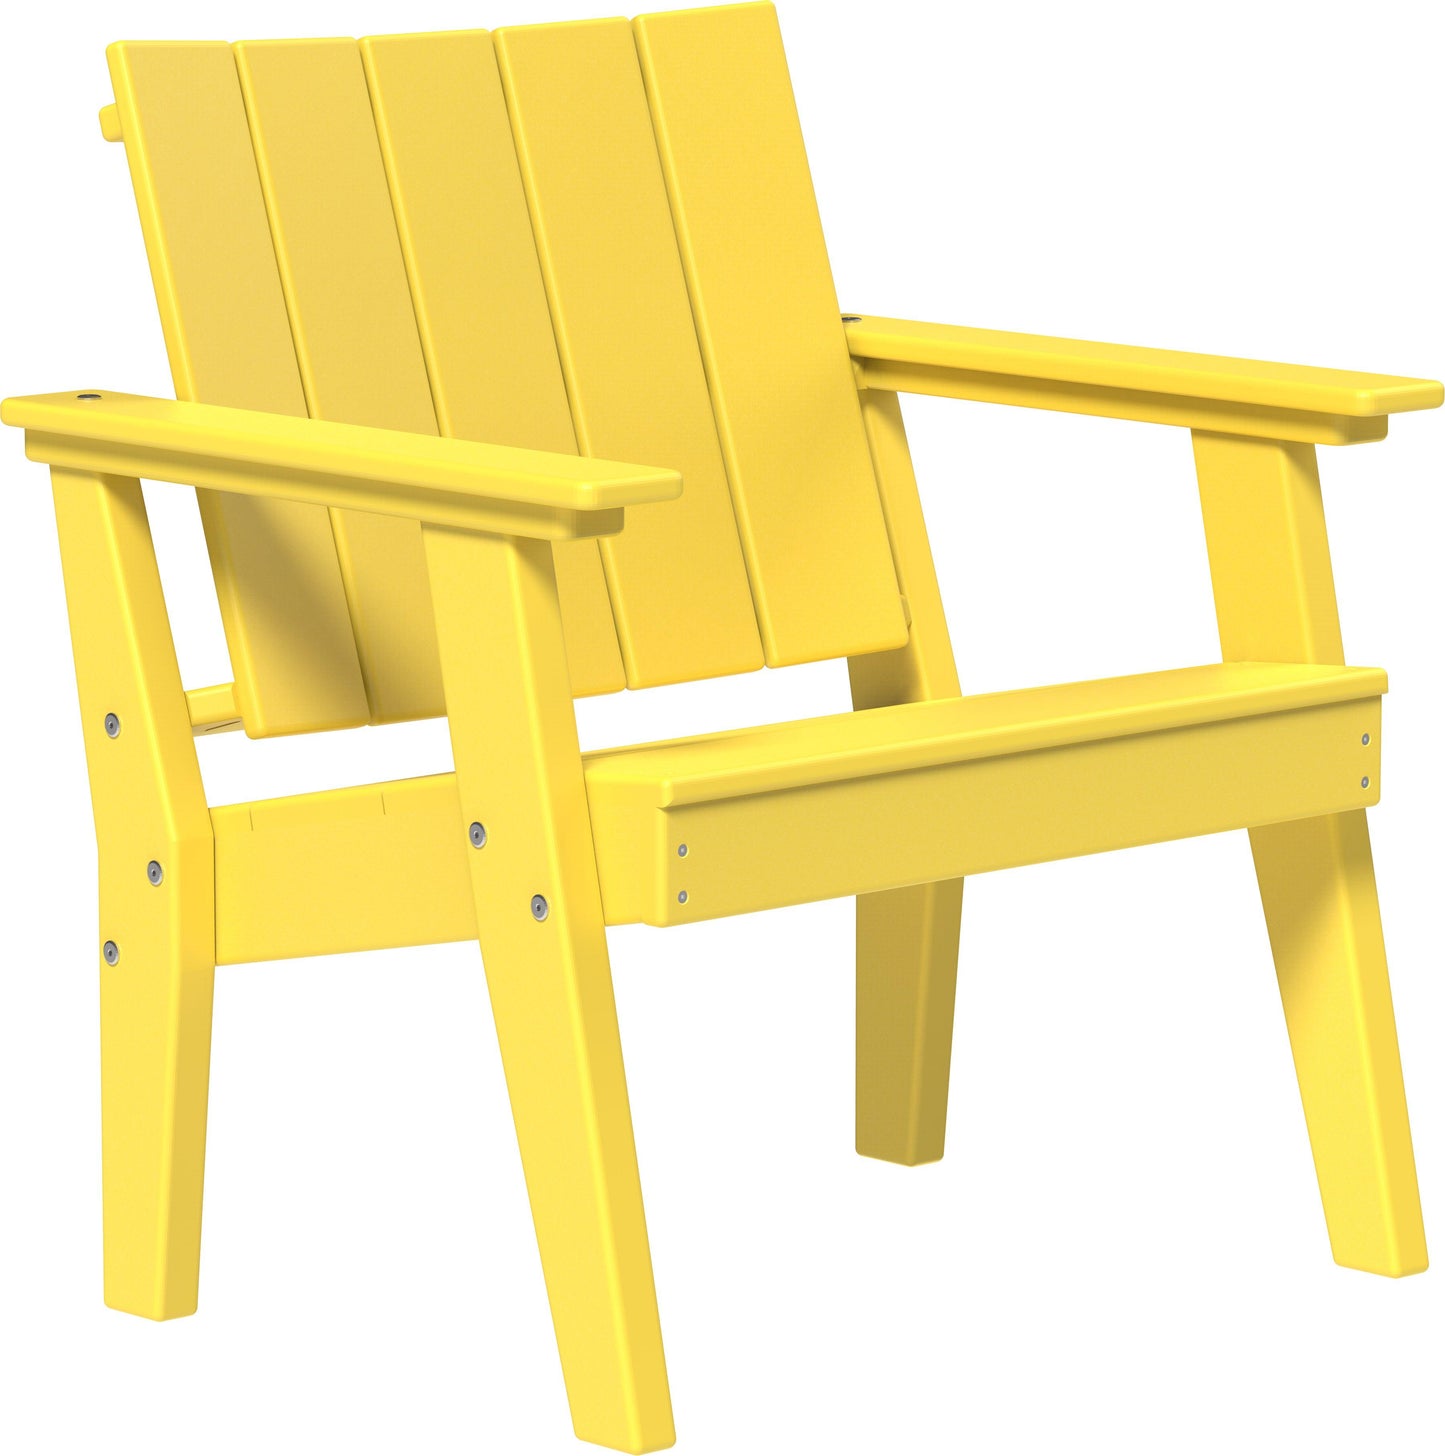 LuxCraft Recycled Plastic Urban Chat Deck Chair - LEAD TIME TO SHIP 10 TO 12 BUSINESS DAYS